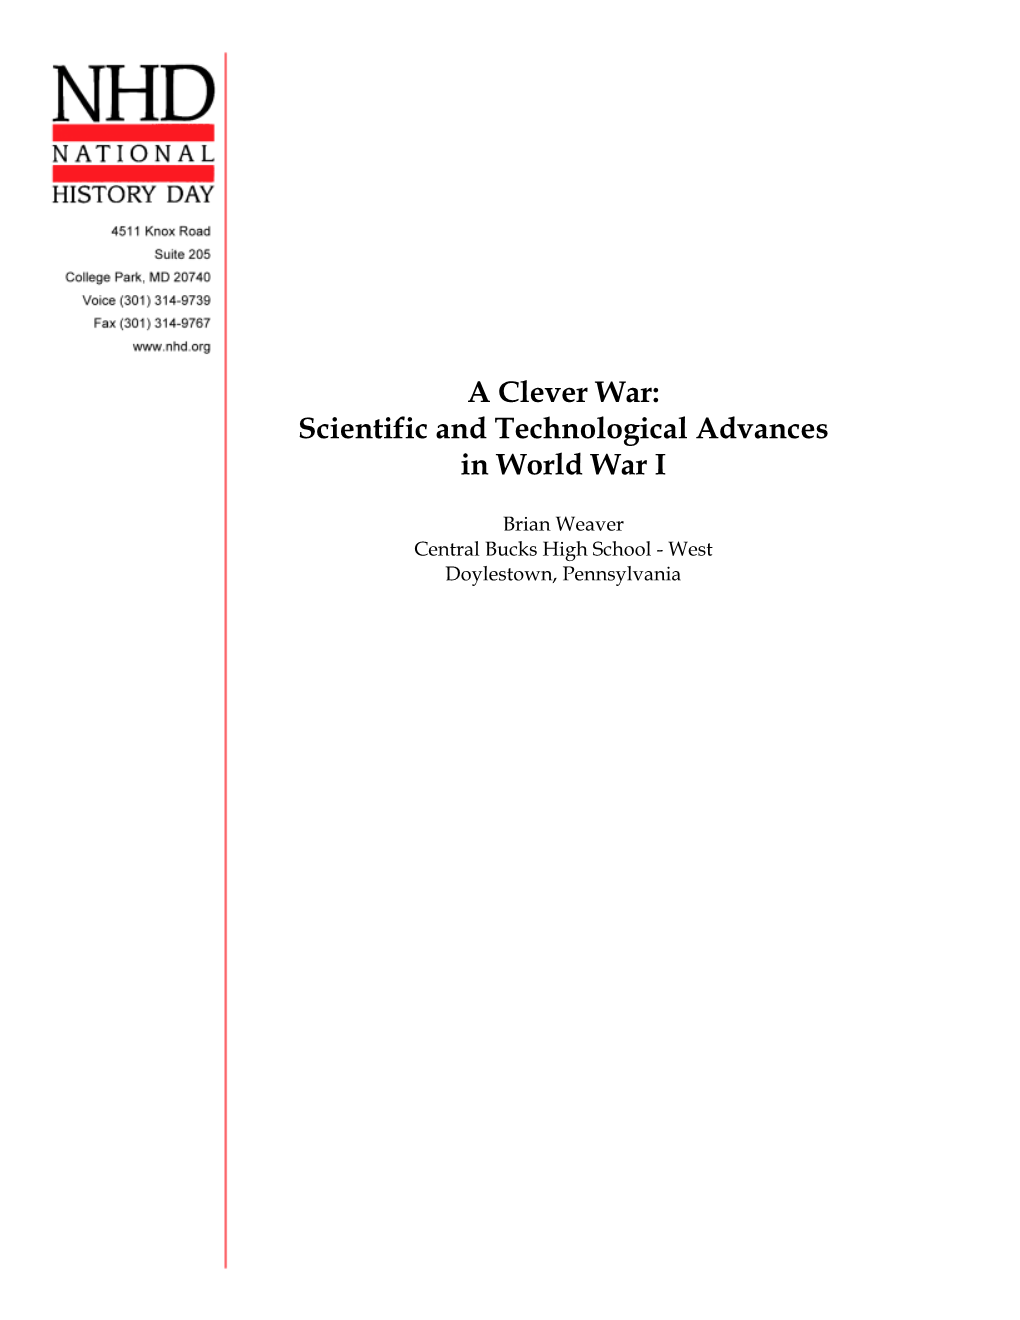 Scientific and Technological Advances in World War I